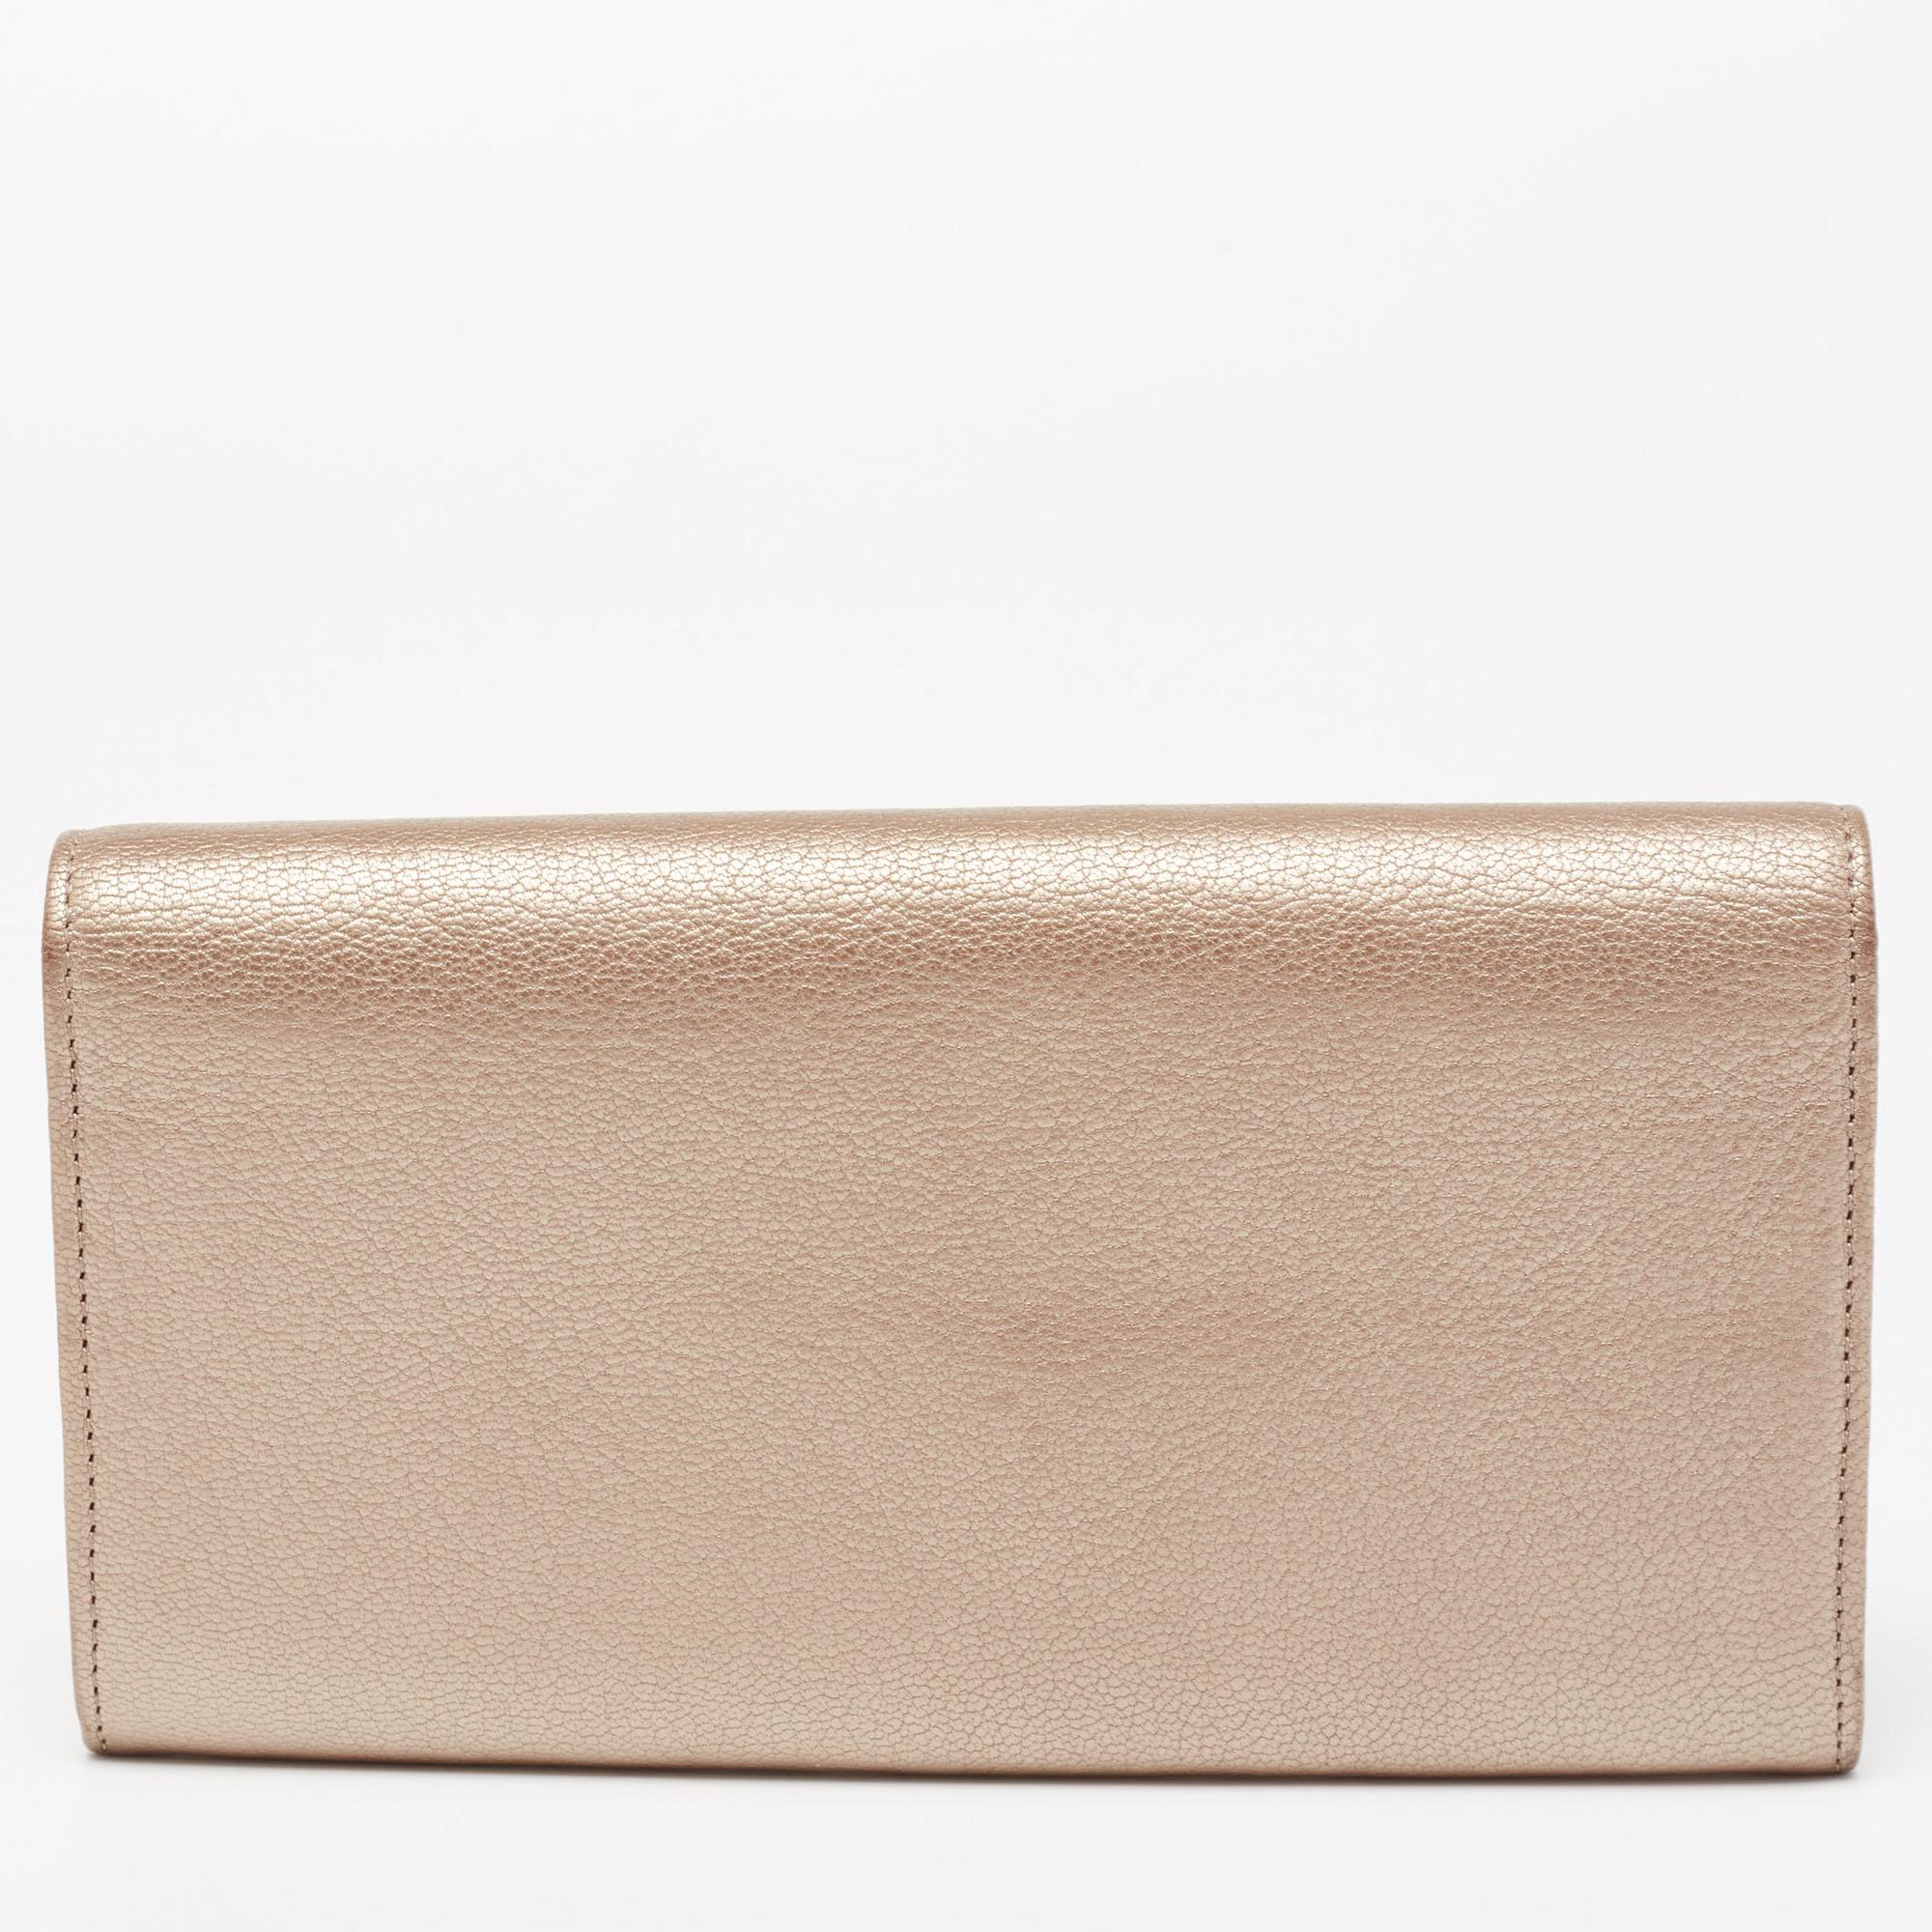 Basic essentials can be carried effortlessly in this stunning Cartier wallet. Crafted from gold-hued leather, the flap-style wallet features multiple card slots, compartments, and a zip pocket.

Includes: Original Pouch
